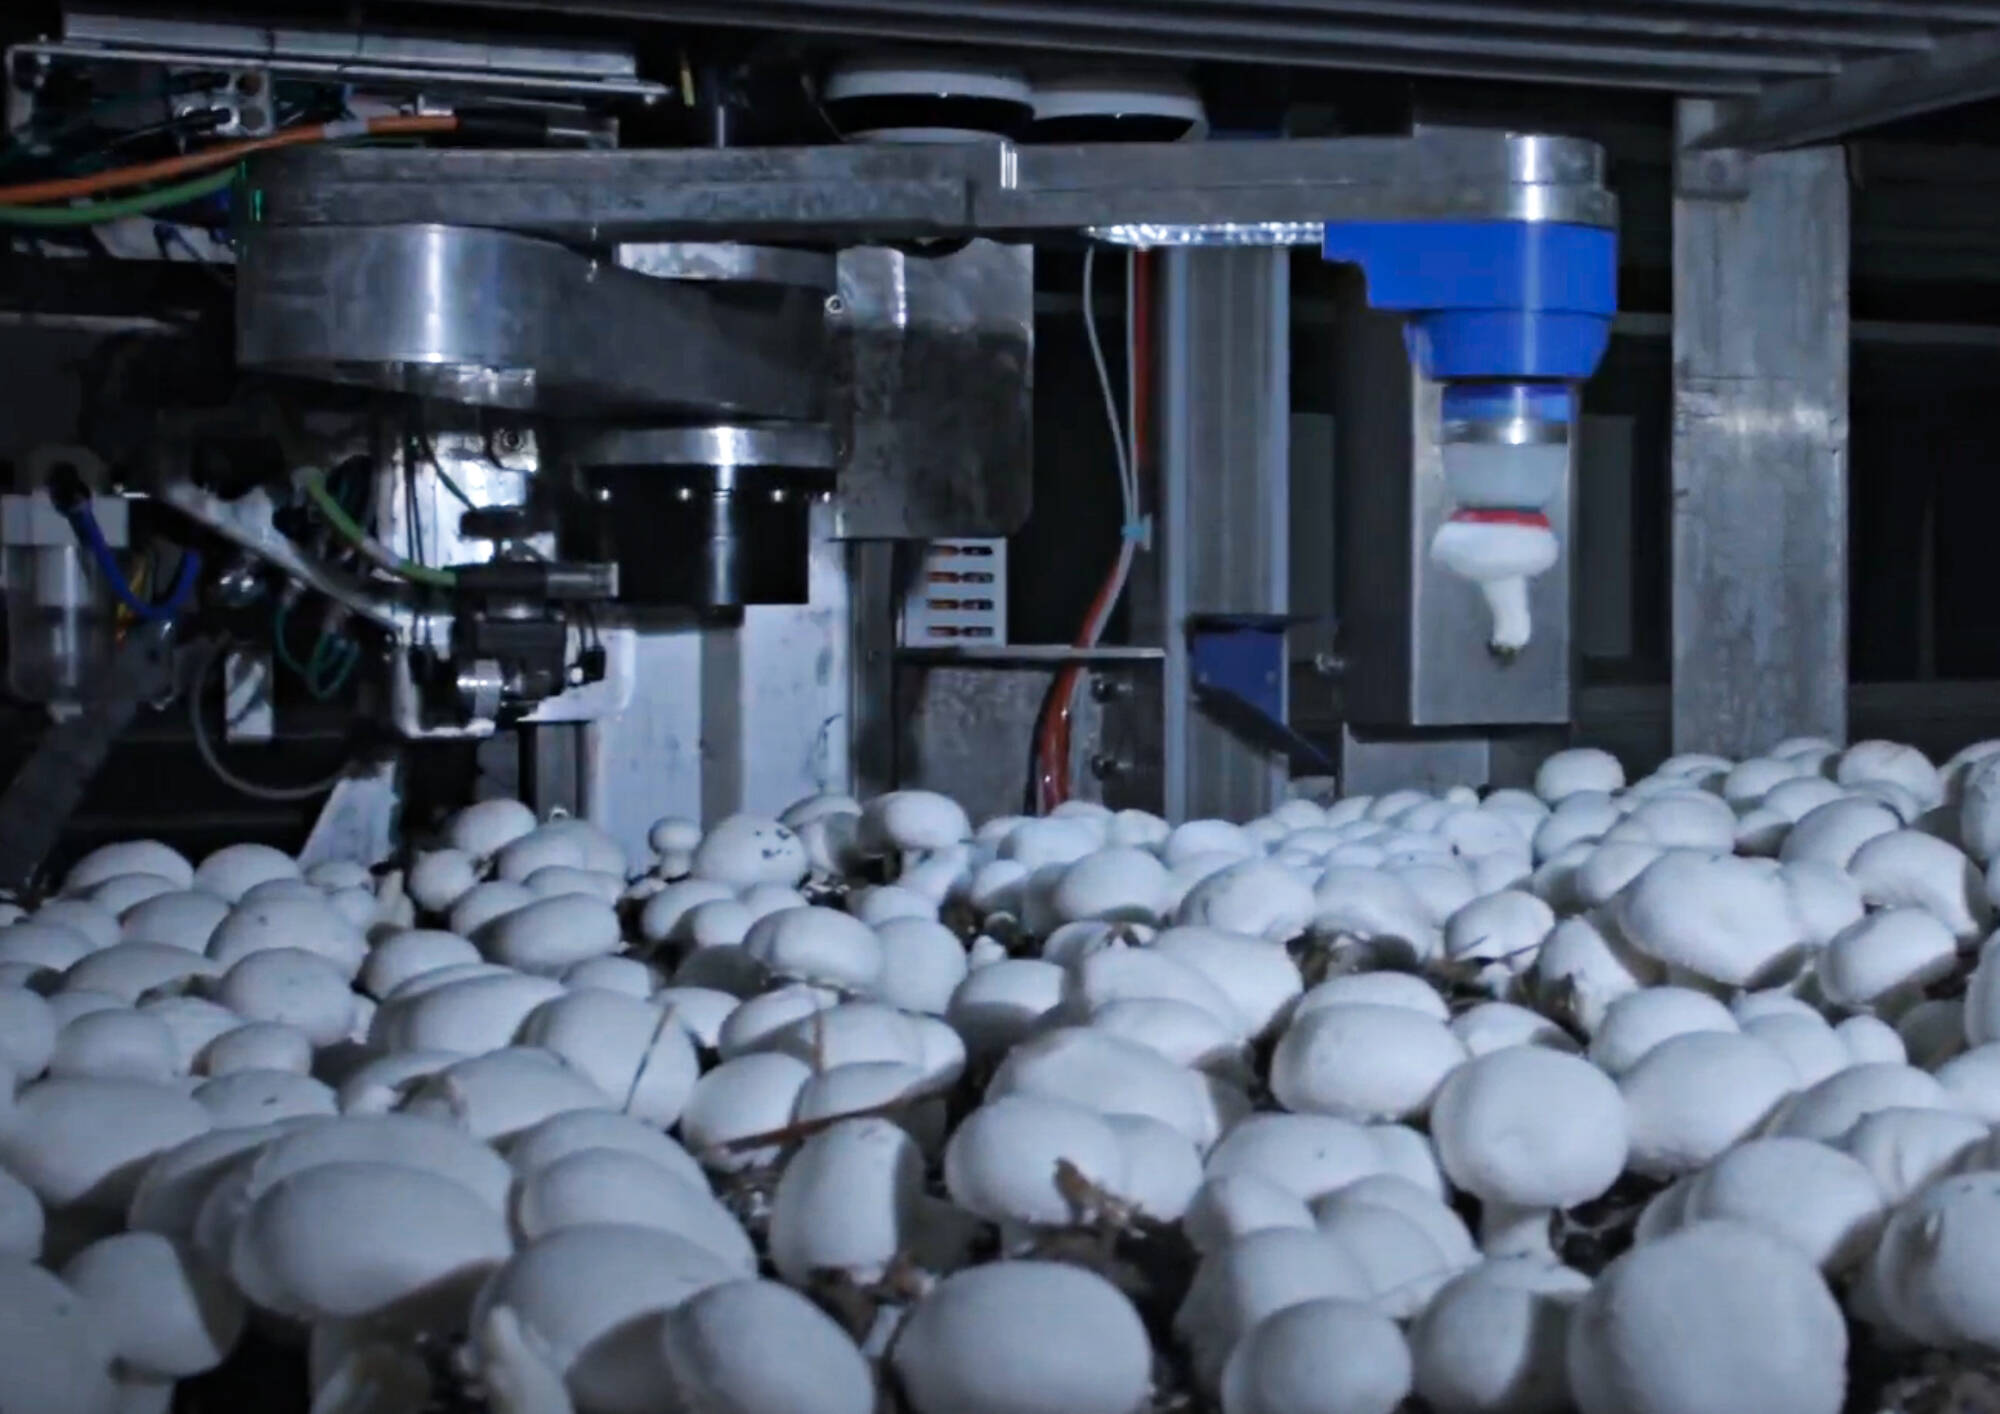 Salmon Arm’s 4AG Robotics (formerly TechBrew Robotics) has secured $17.5 million in financing to accelerate the development and deployment robotic solutions for mushroom harvesting. (TechBrew Robotics/Youtube image)